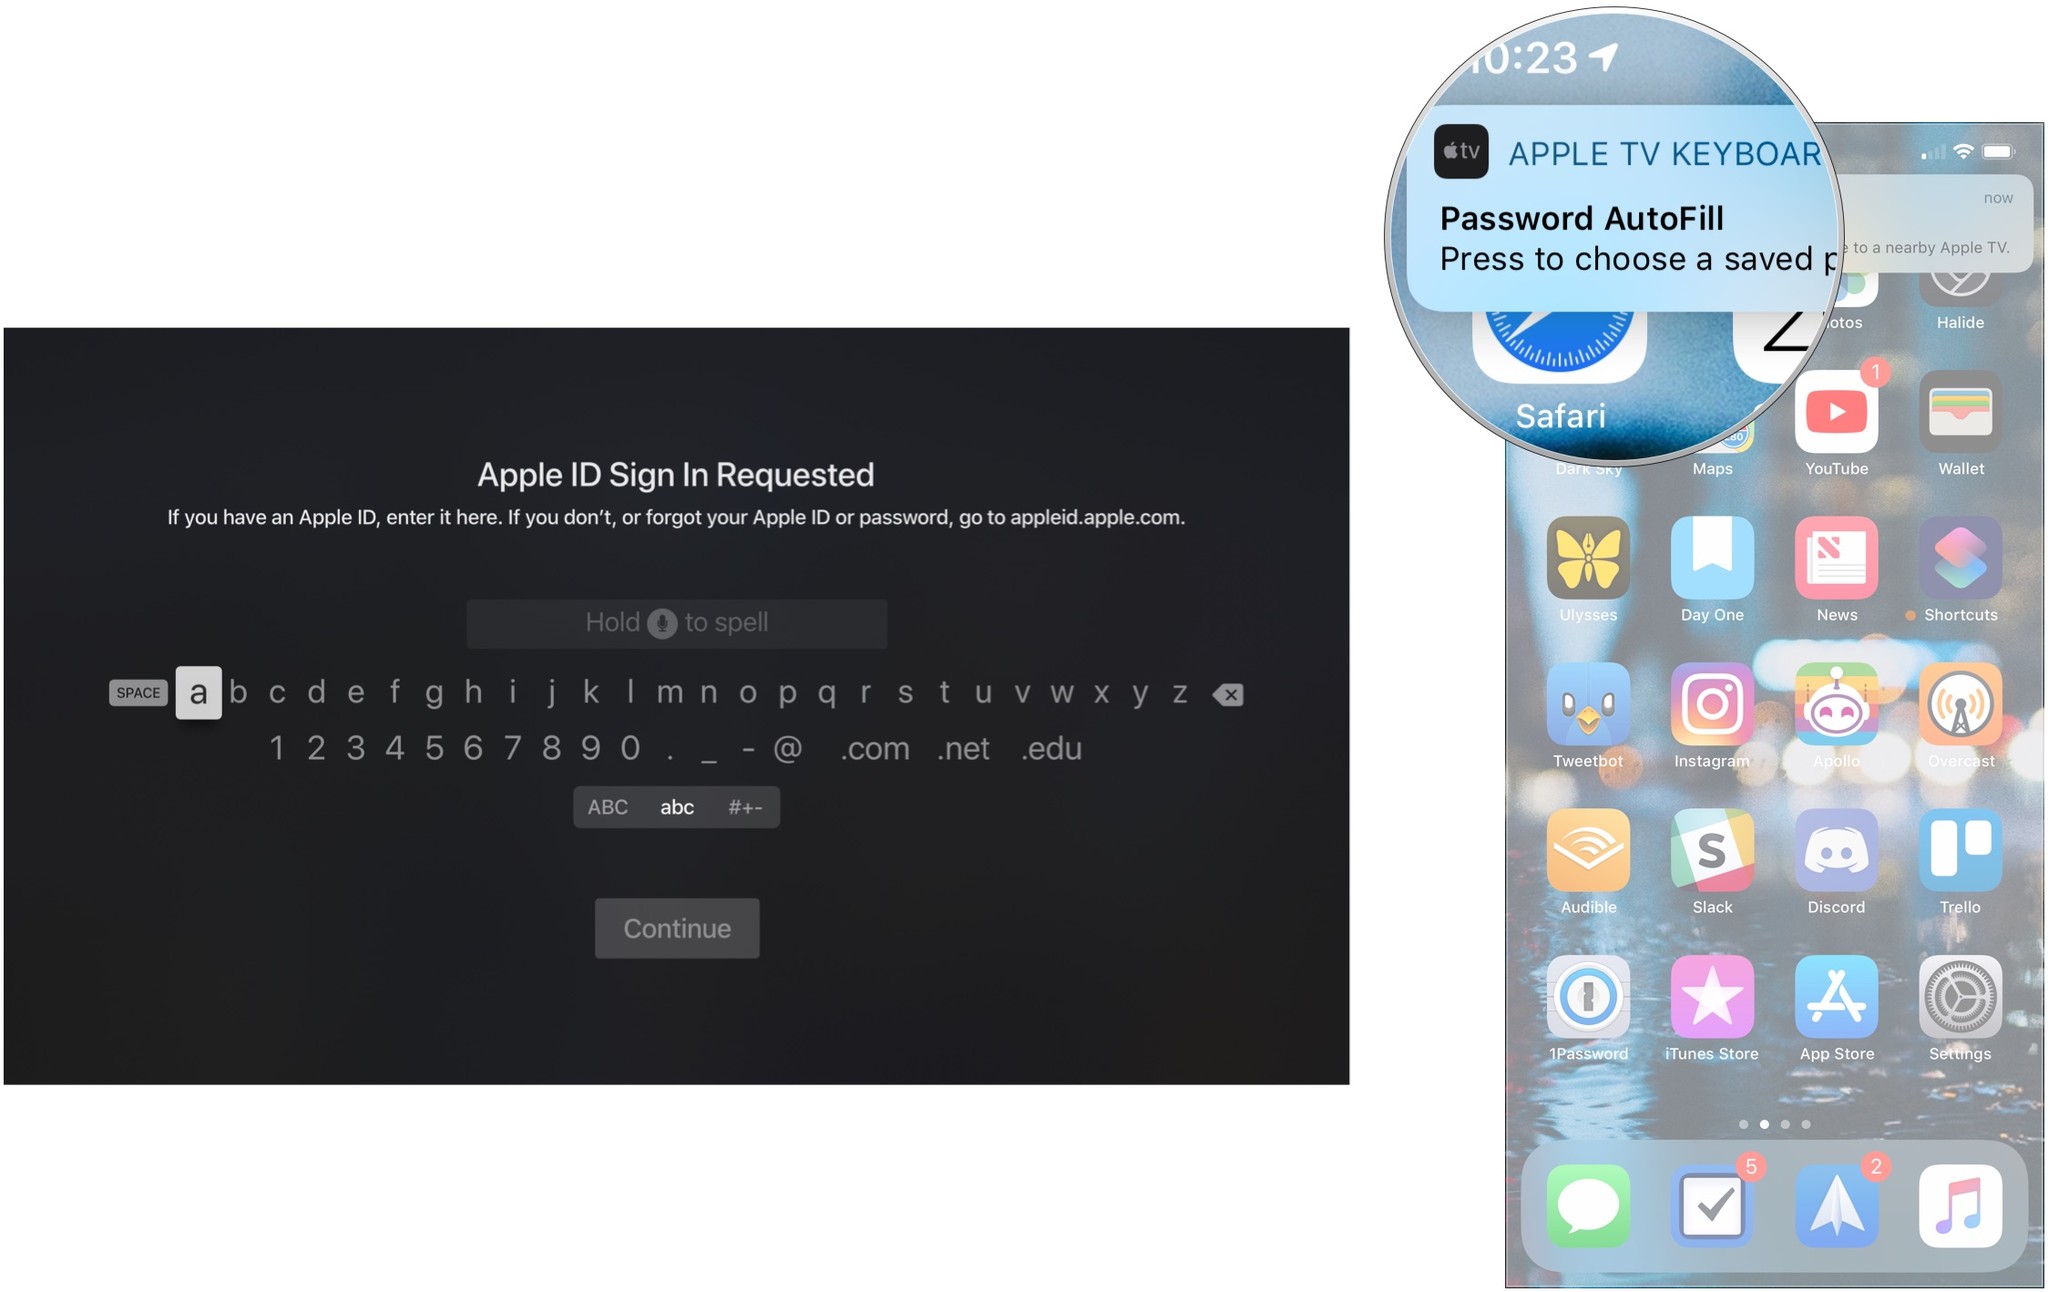 How to use AutoFill on Apple TV and iPhone by showing the steps: Go to a username or password field, tap the AutoFill password notification on your iPhone